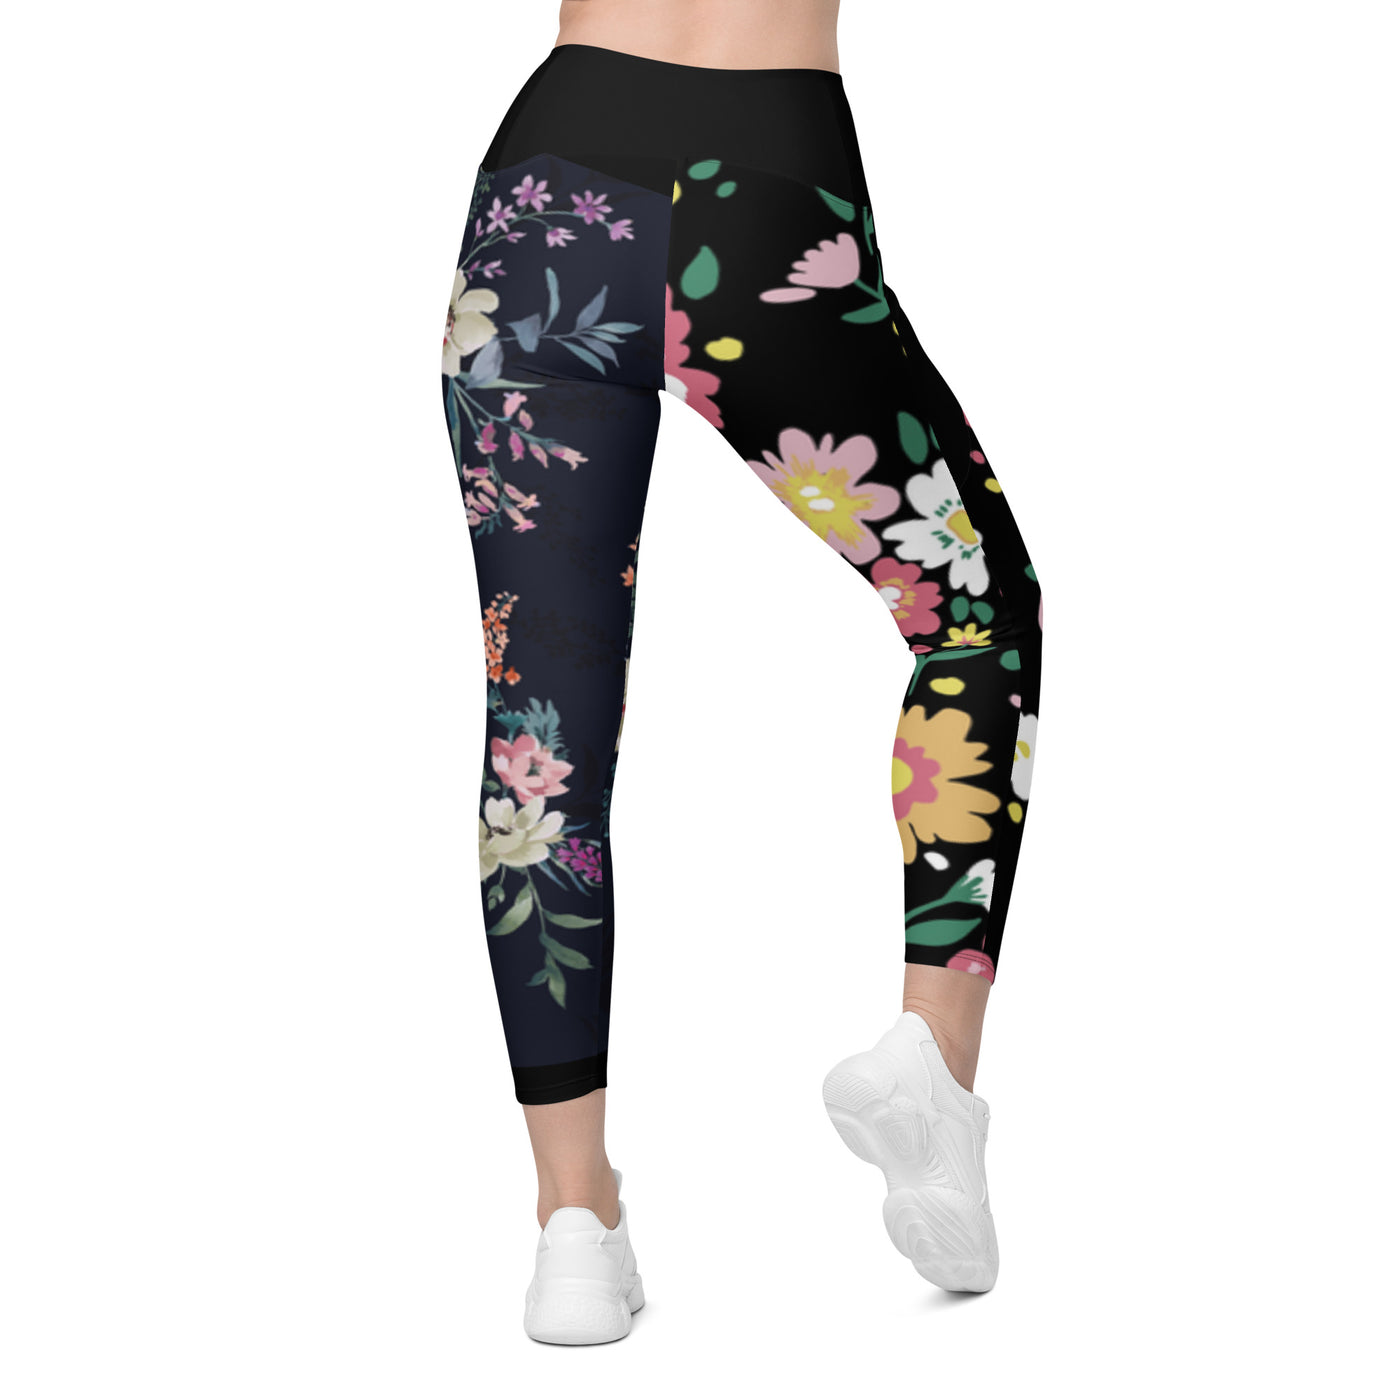 F&H Christian Peaceful Leggings with pockets - Faith and Happiness Store